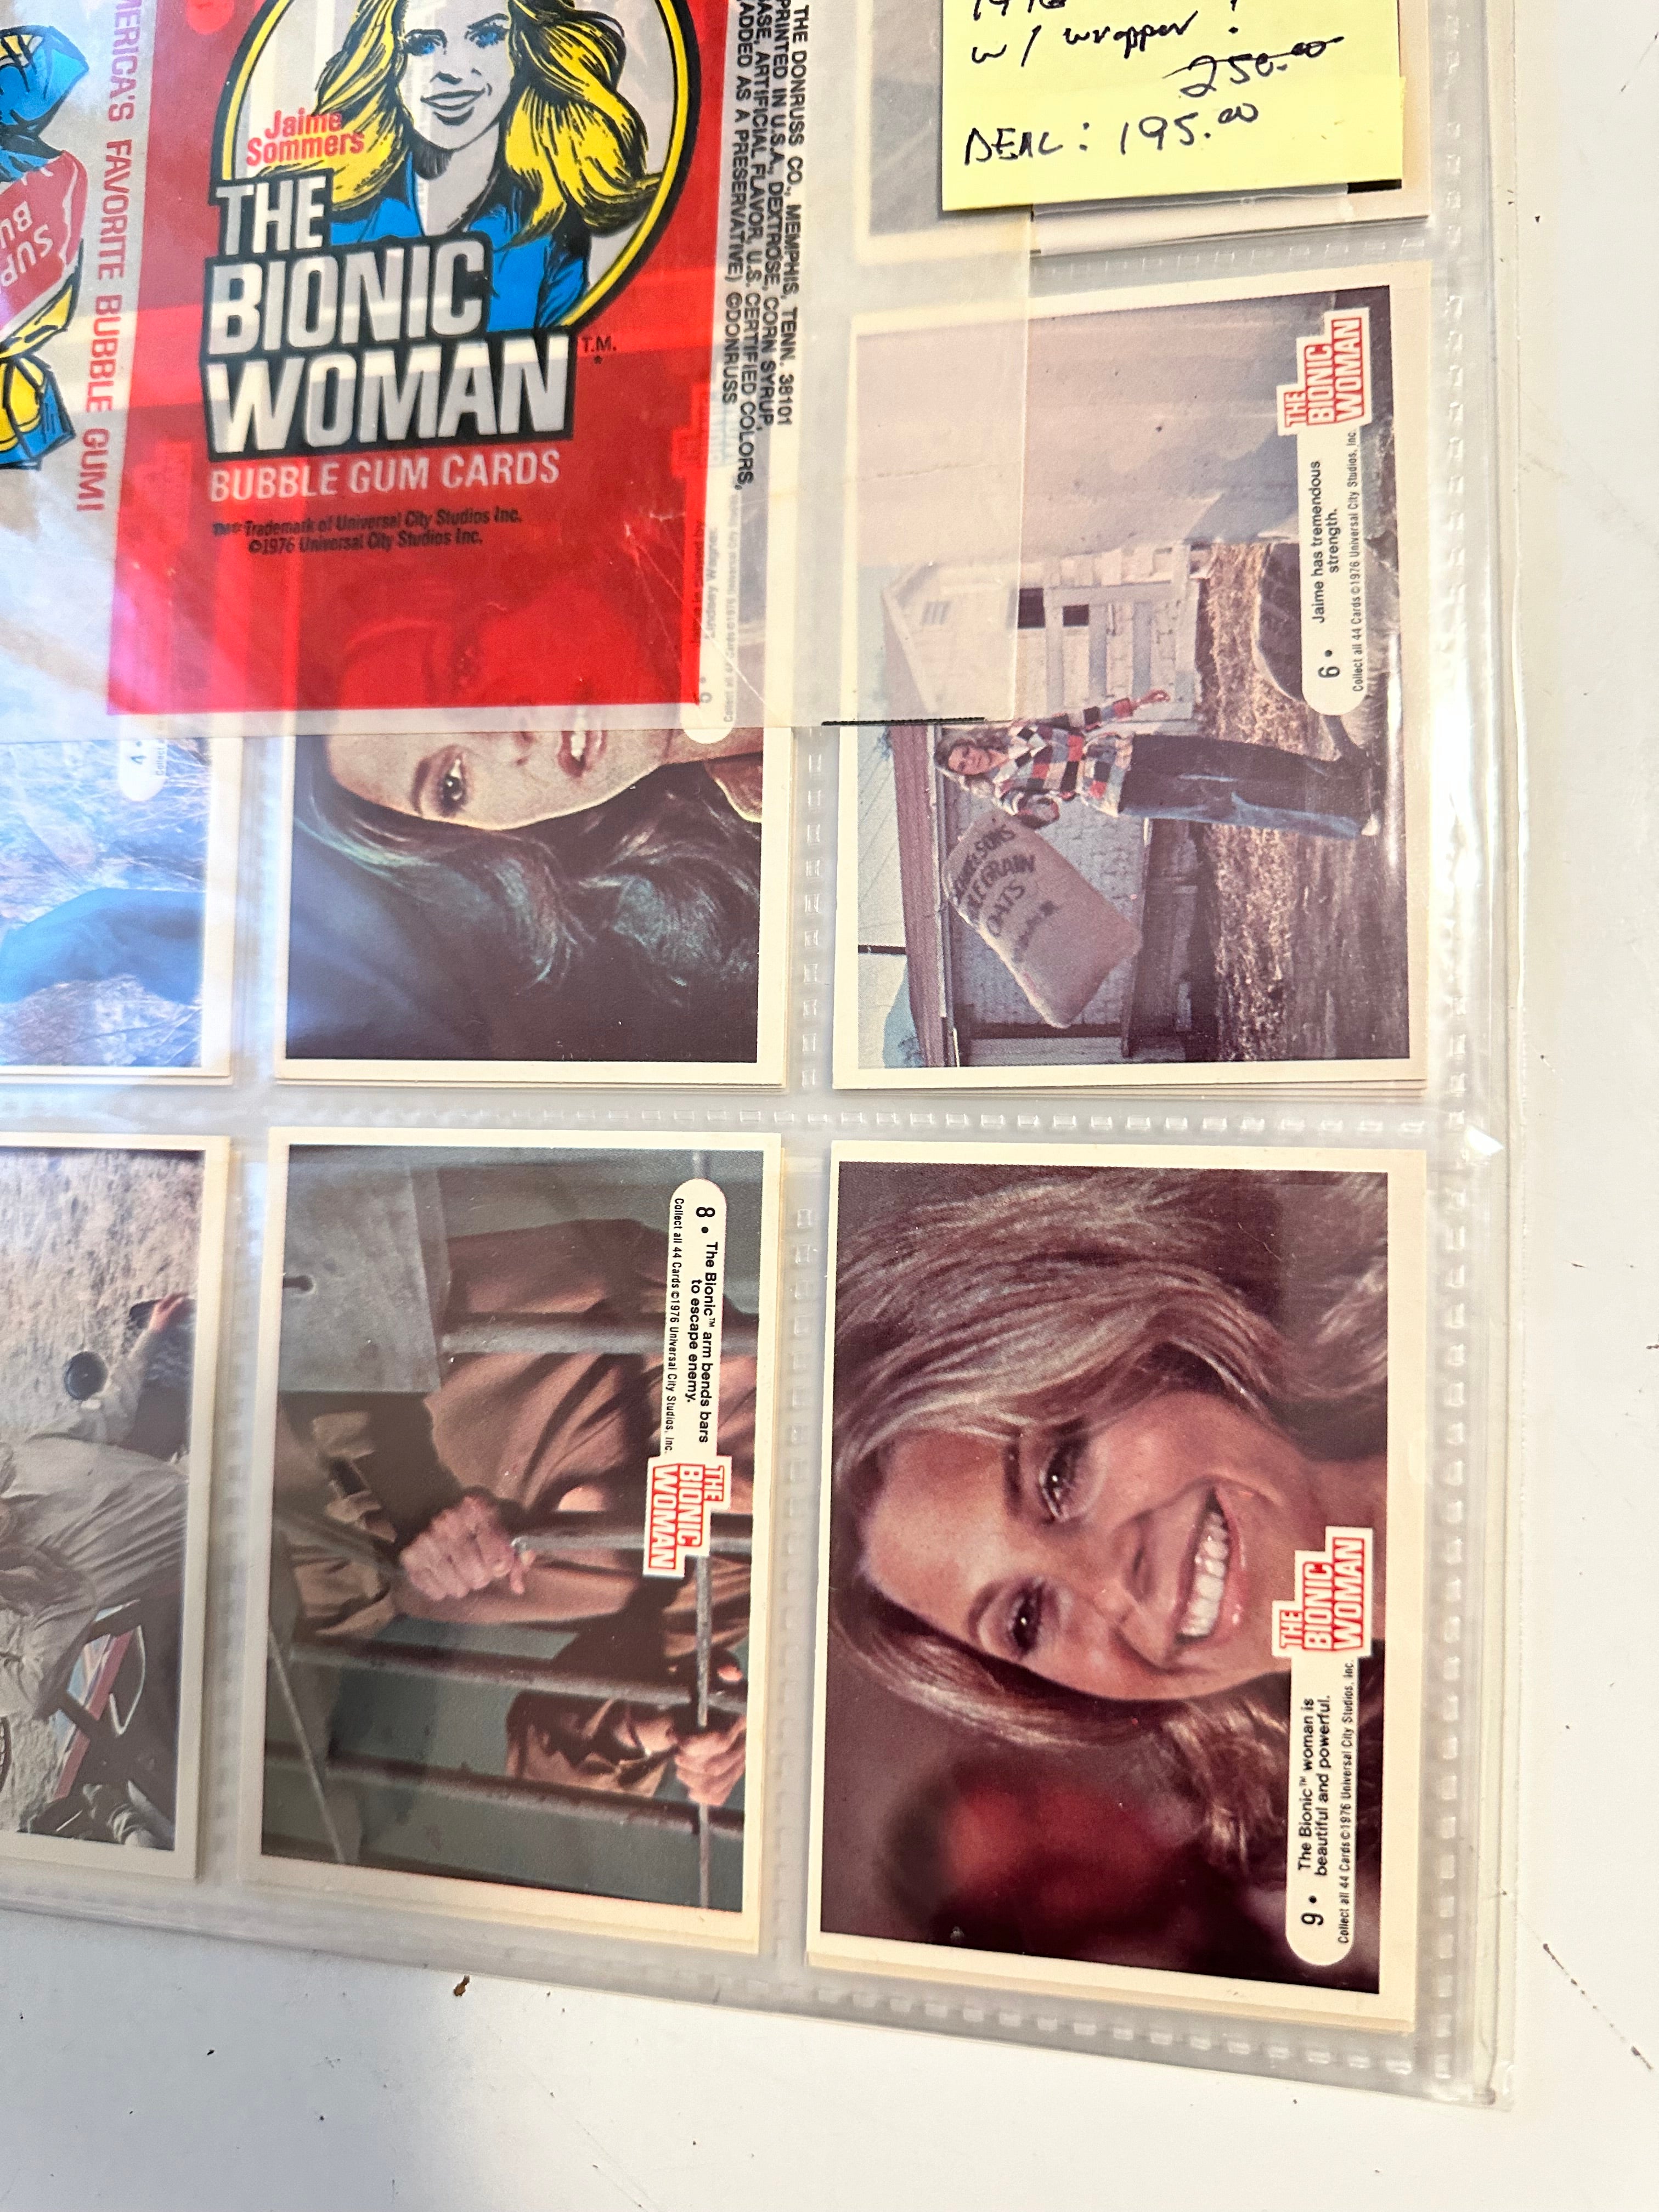 Bionic Woman TV show cards set with wrapper 1976